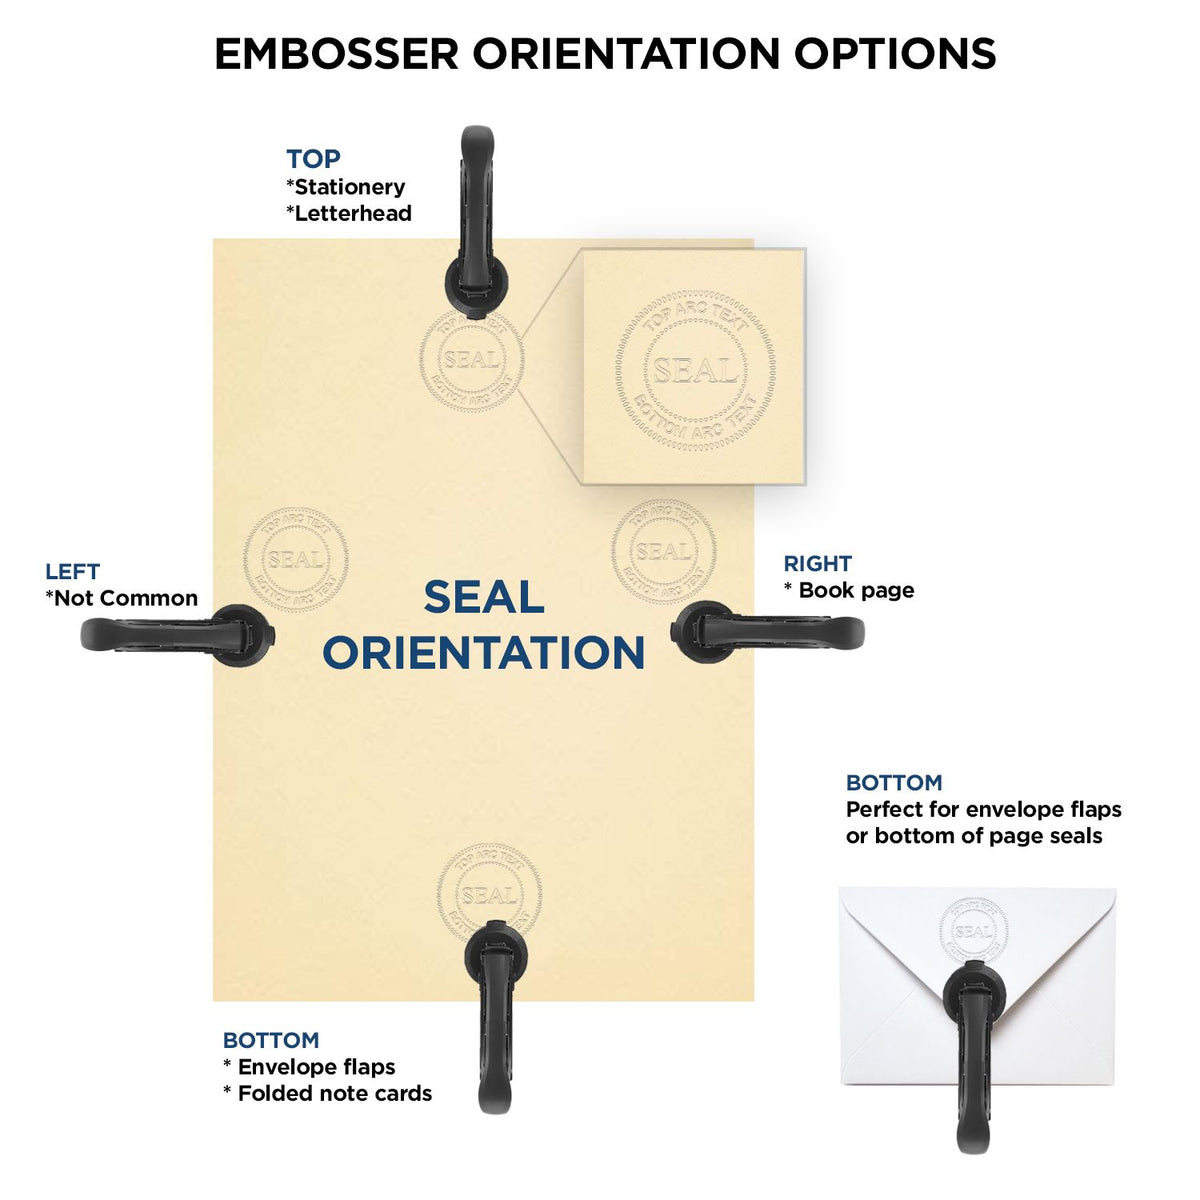 An infographic for the Heavy Duty Cast Iron Nebraska Engineer Seal Embosser showing embosser orientation, this is showing examples of a top, bottom, right and left insert.